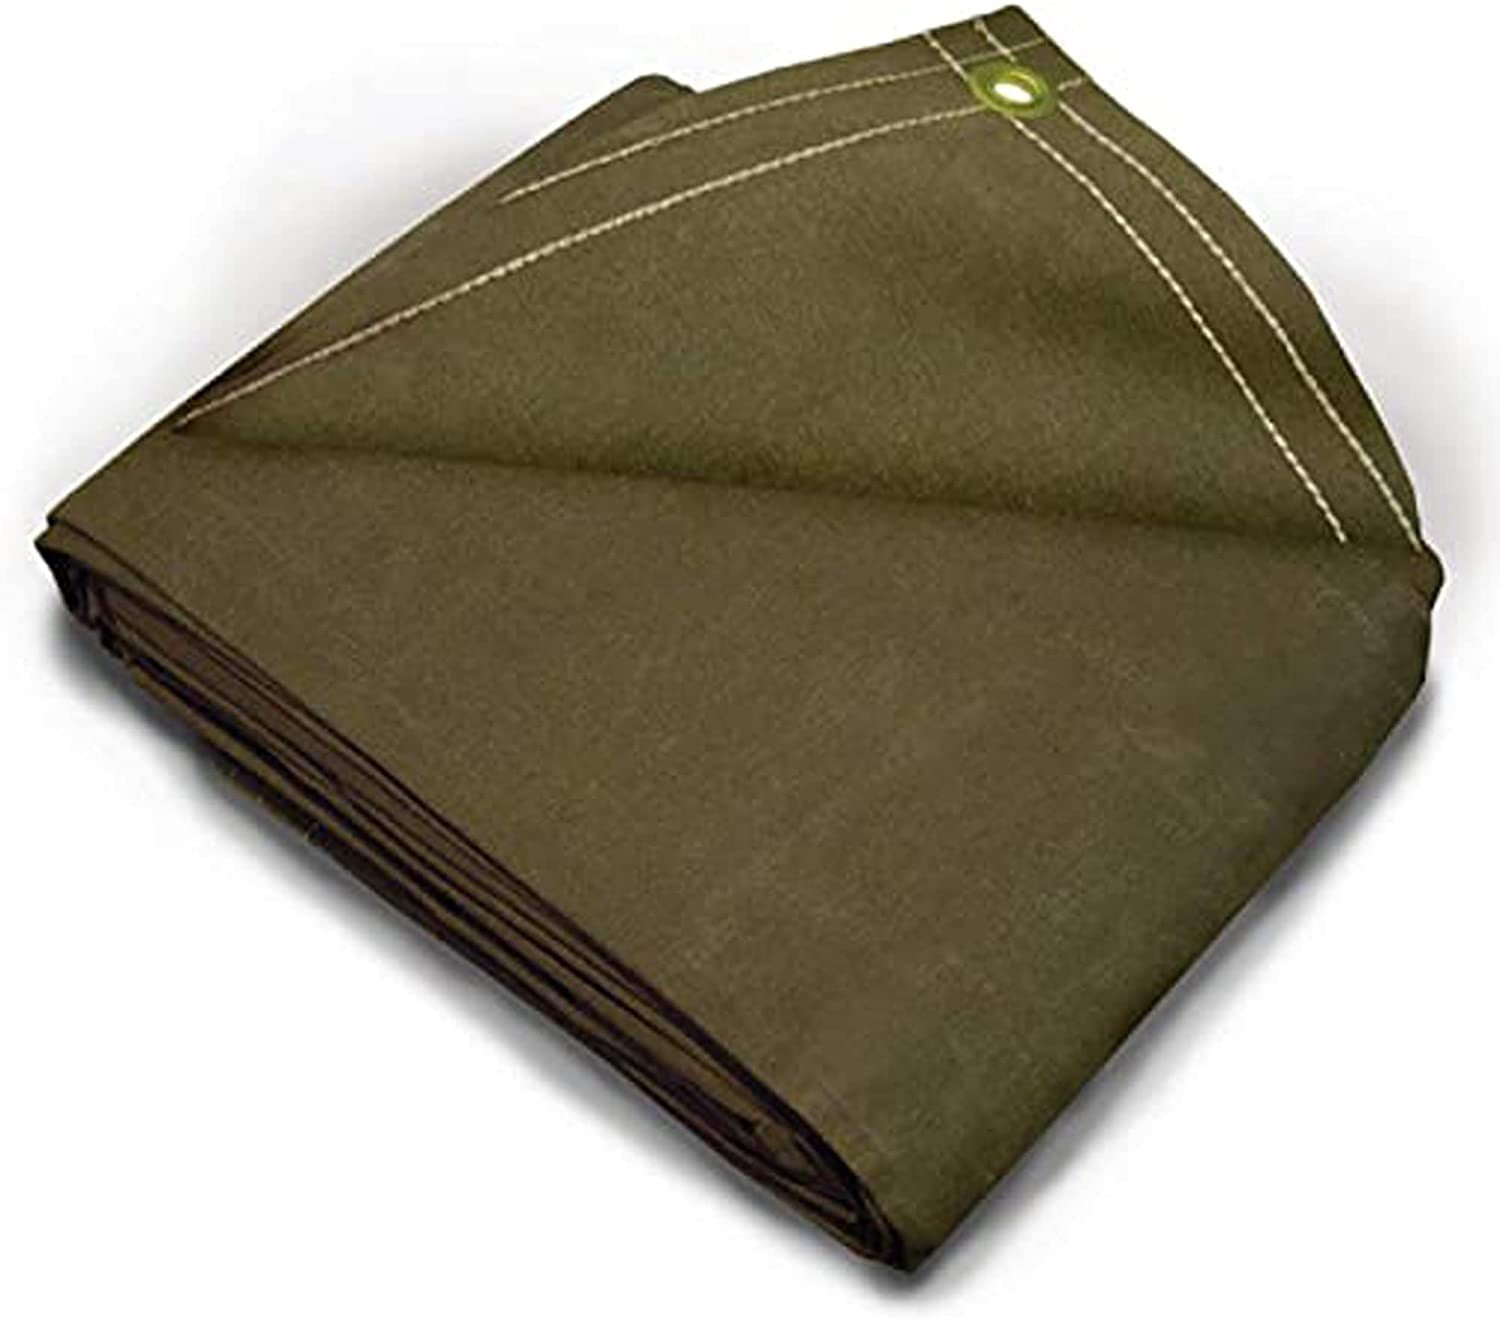 6ft x 4ft green plastic tarpaulins Pack of 3 Ideal for trailers garden car etc 